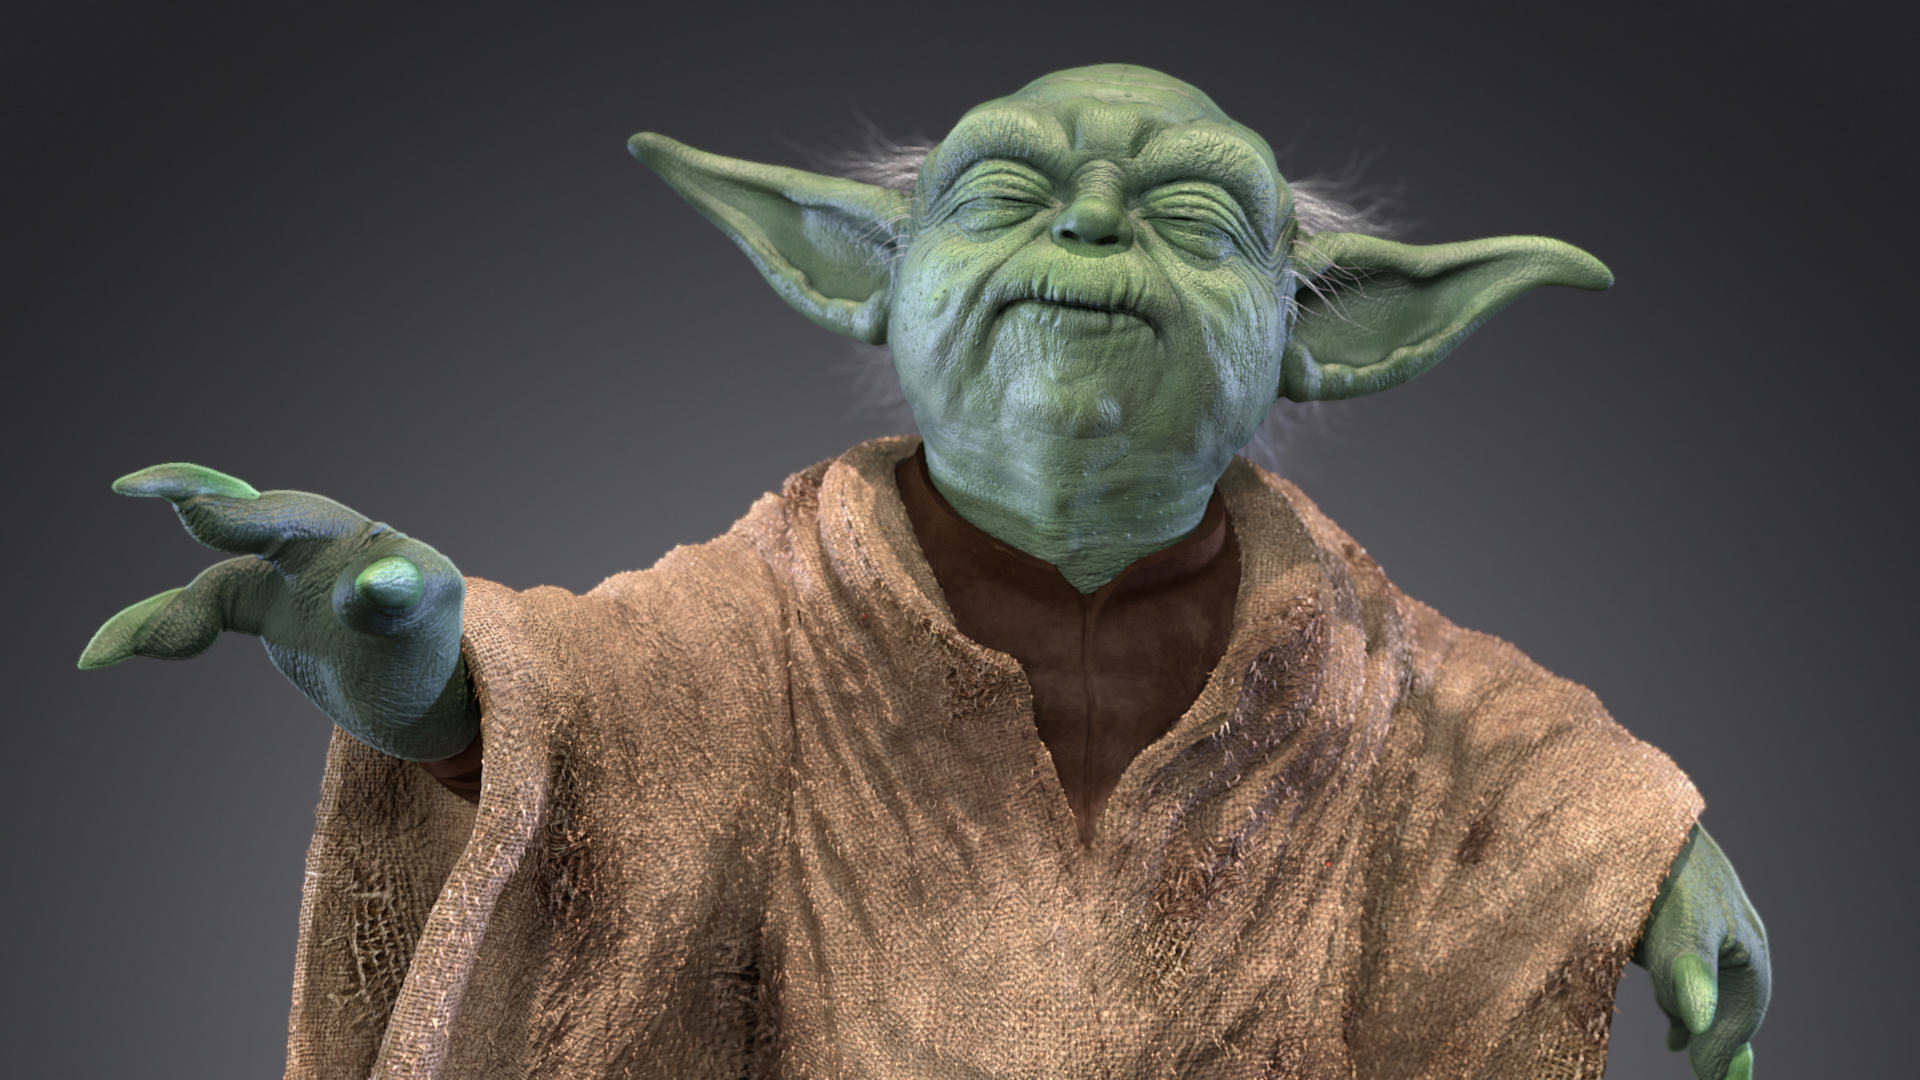 A personal project to sculpt the iconic green Jedi master. 